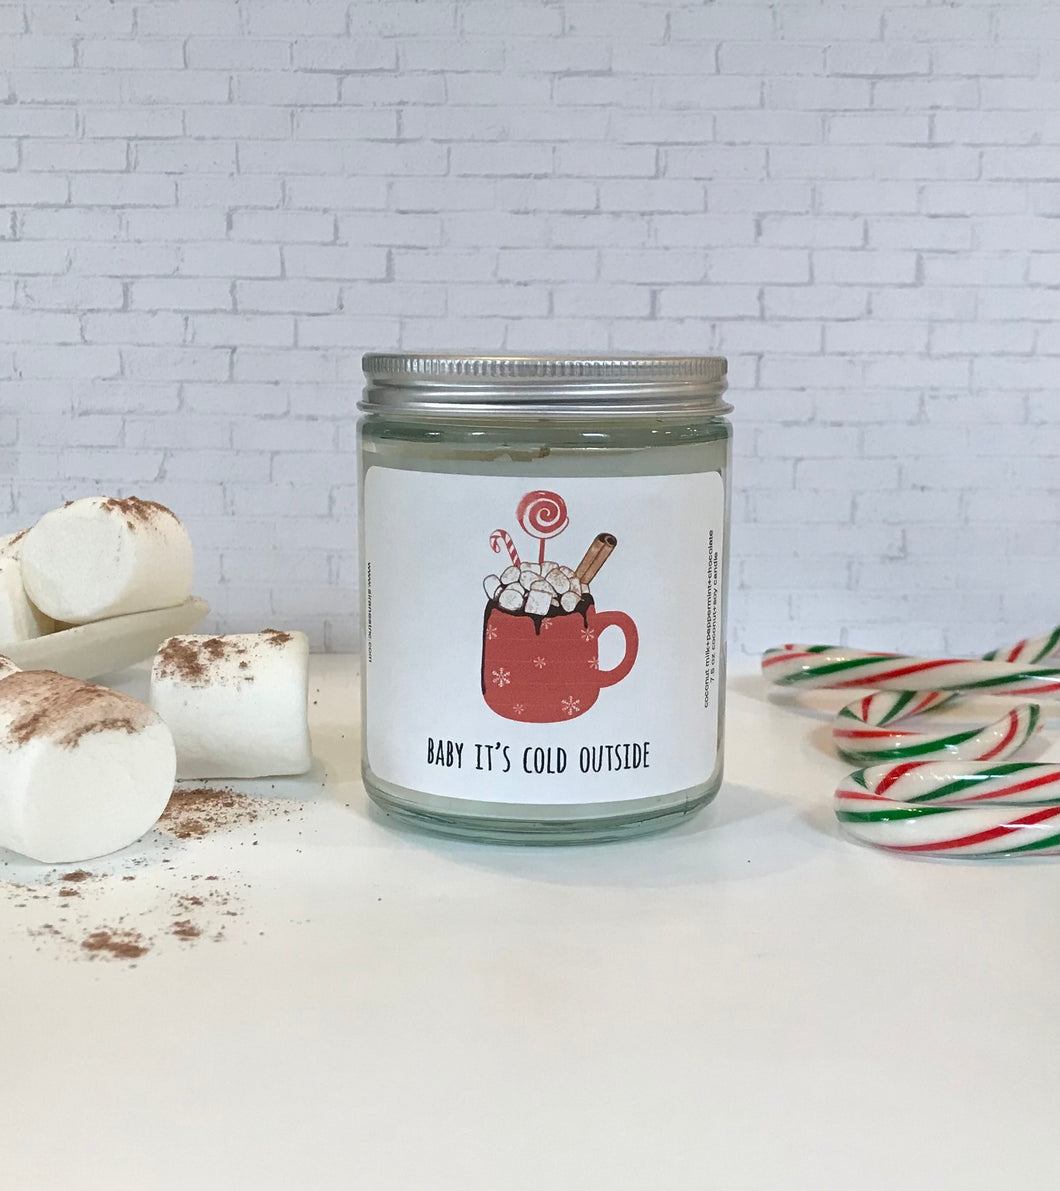 BABY IT'S COLD OUTSIDE CANDLE